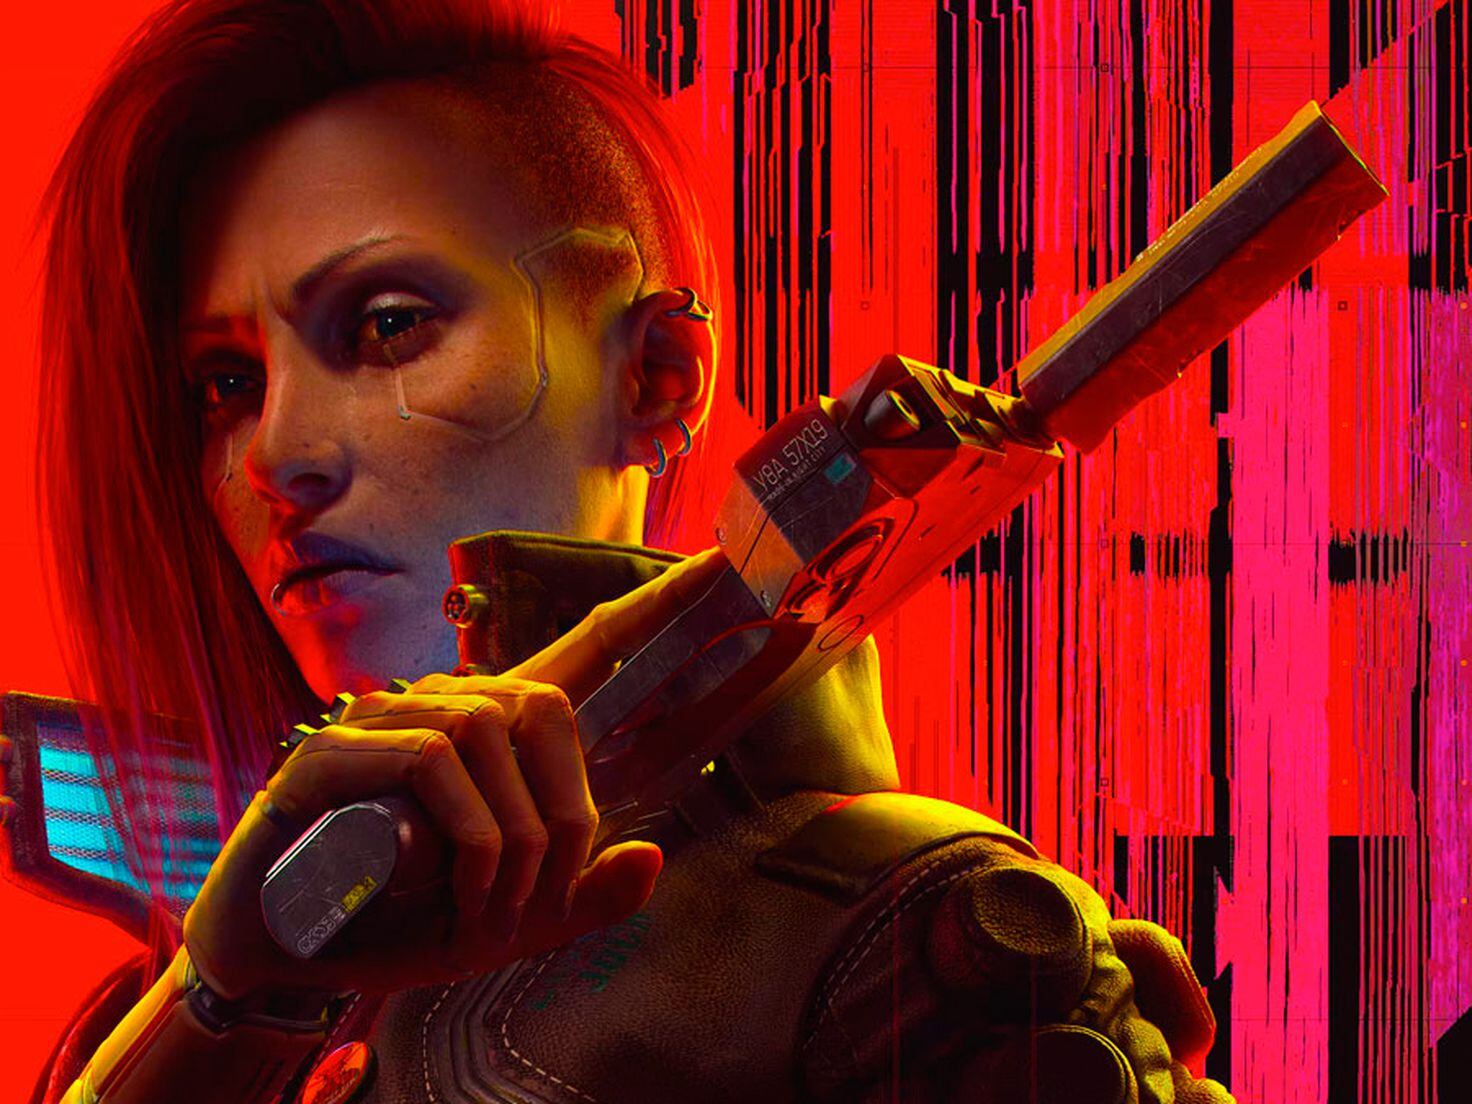 540,000 Reviews Later, 'Cyberpunk 2077' Is Finally 'Very Positive' On Steam